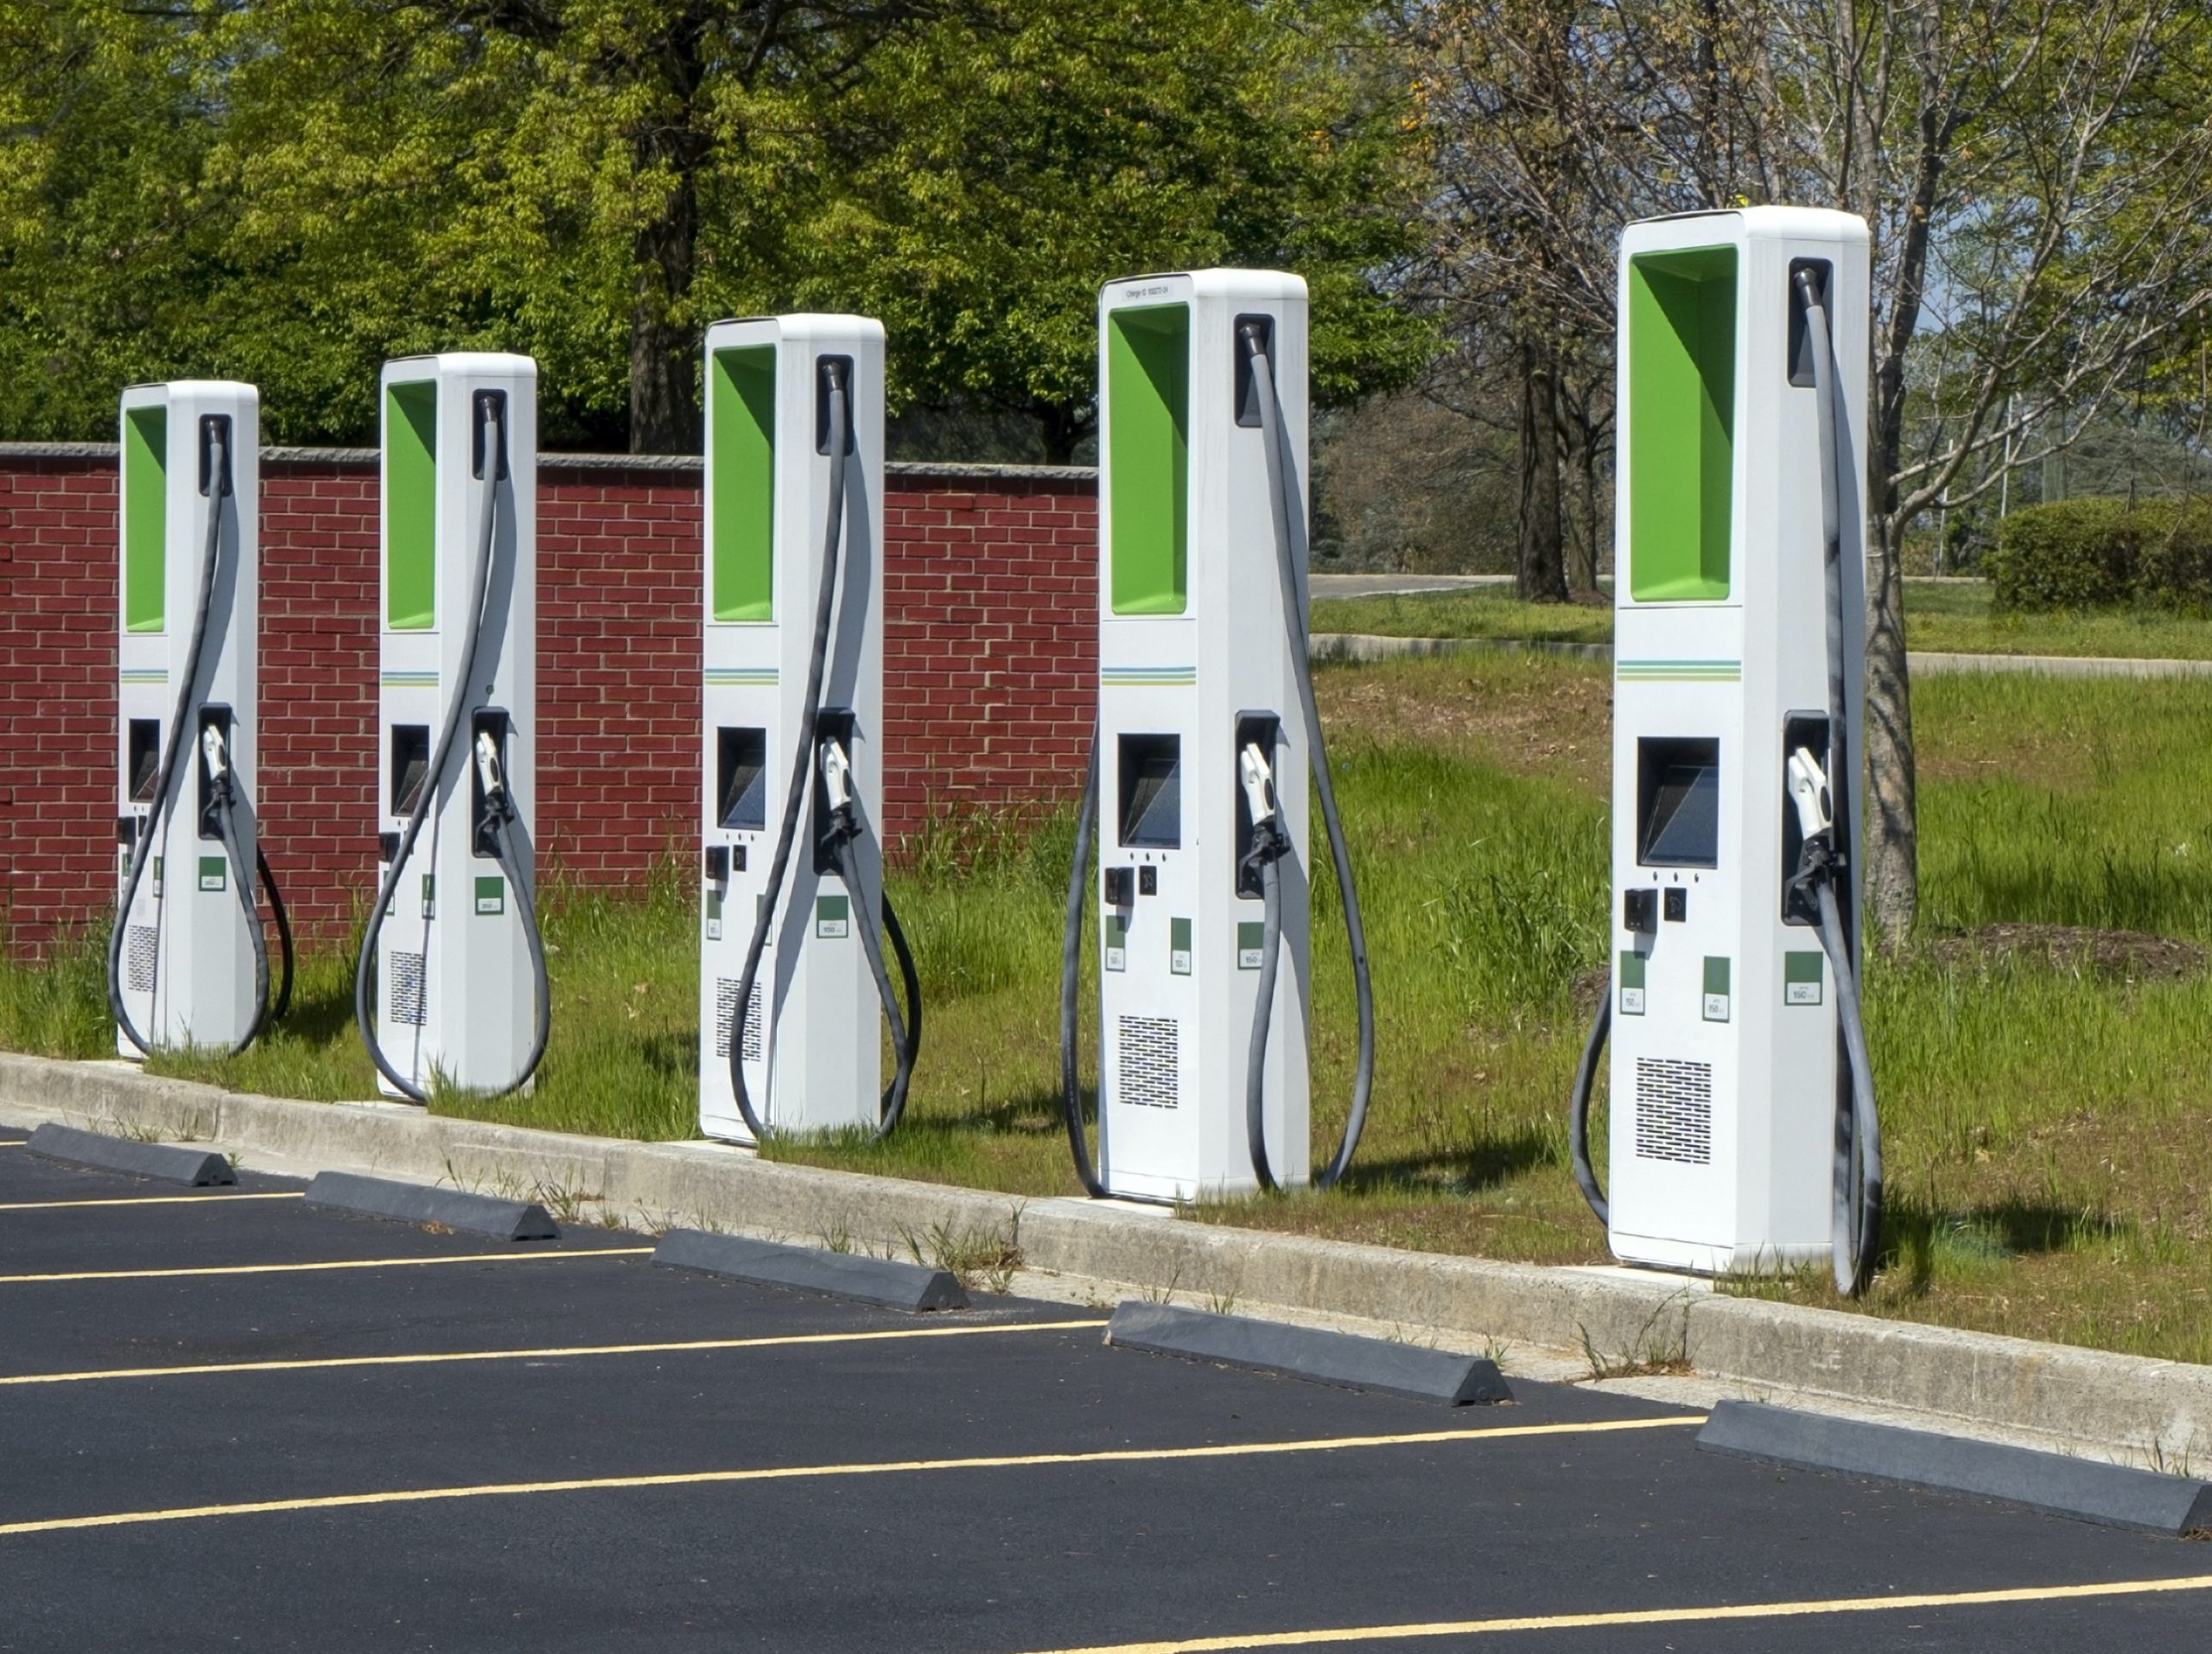 Governors support electric vehicle charging network across Midwest